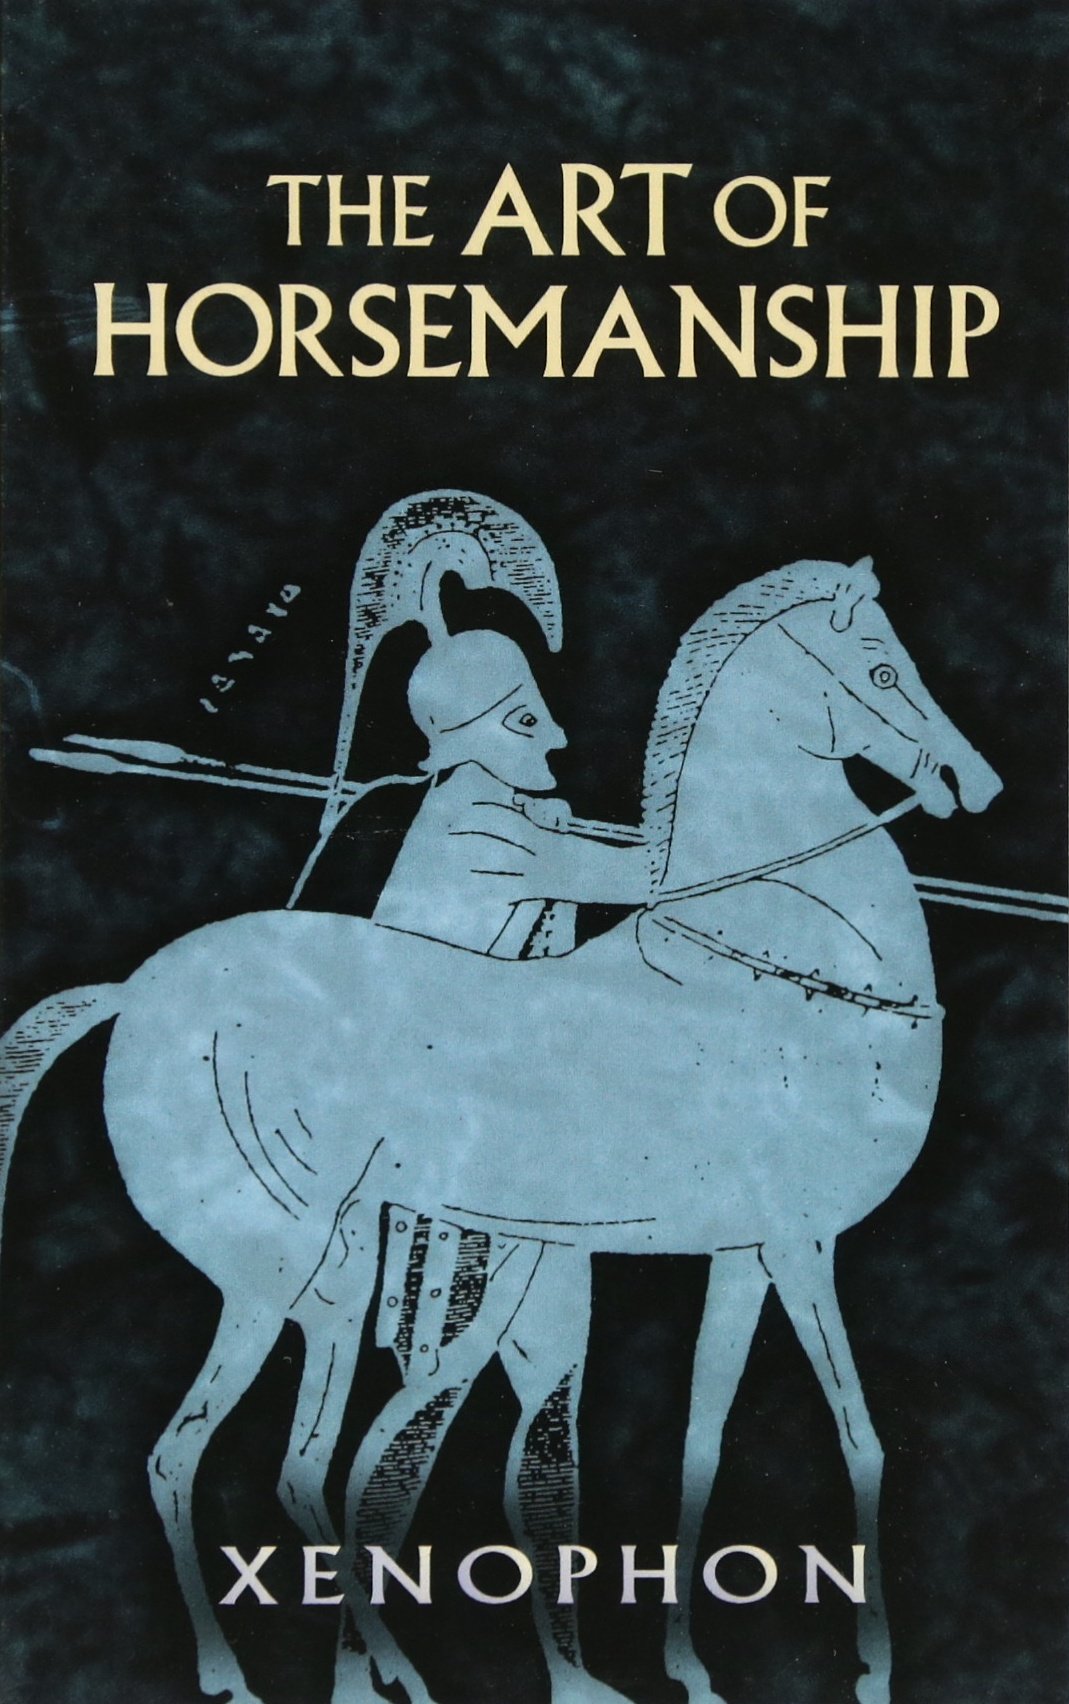 Xenophon's classical text on Greek horsemanship: great reading, even after 2500 years...